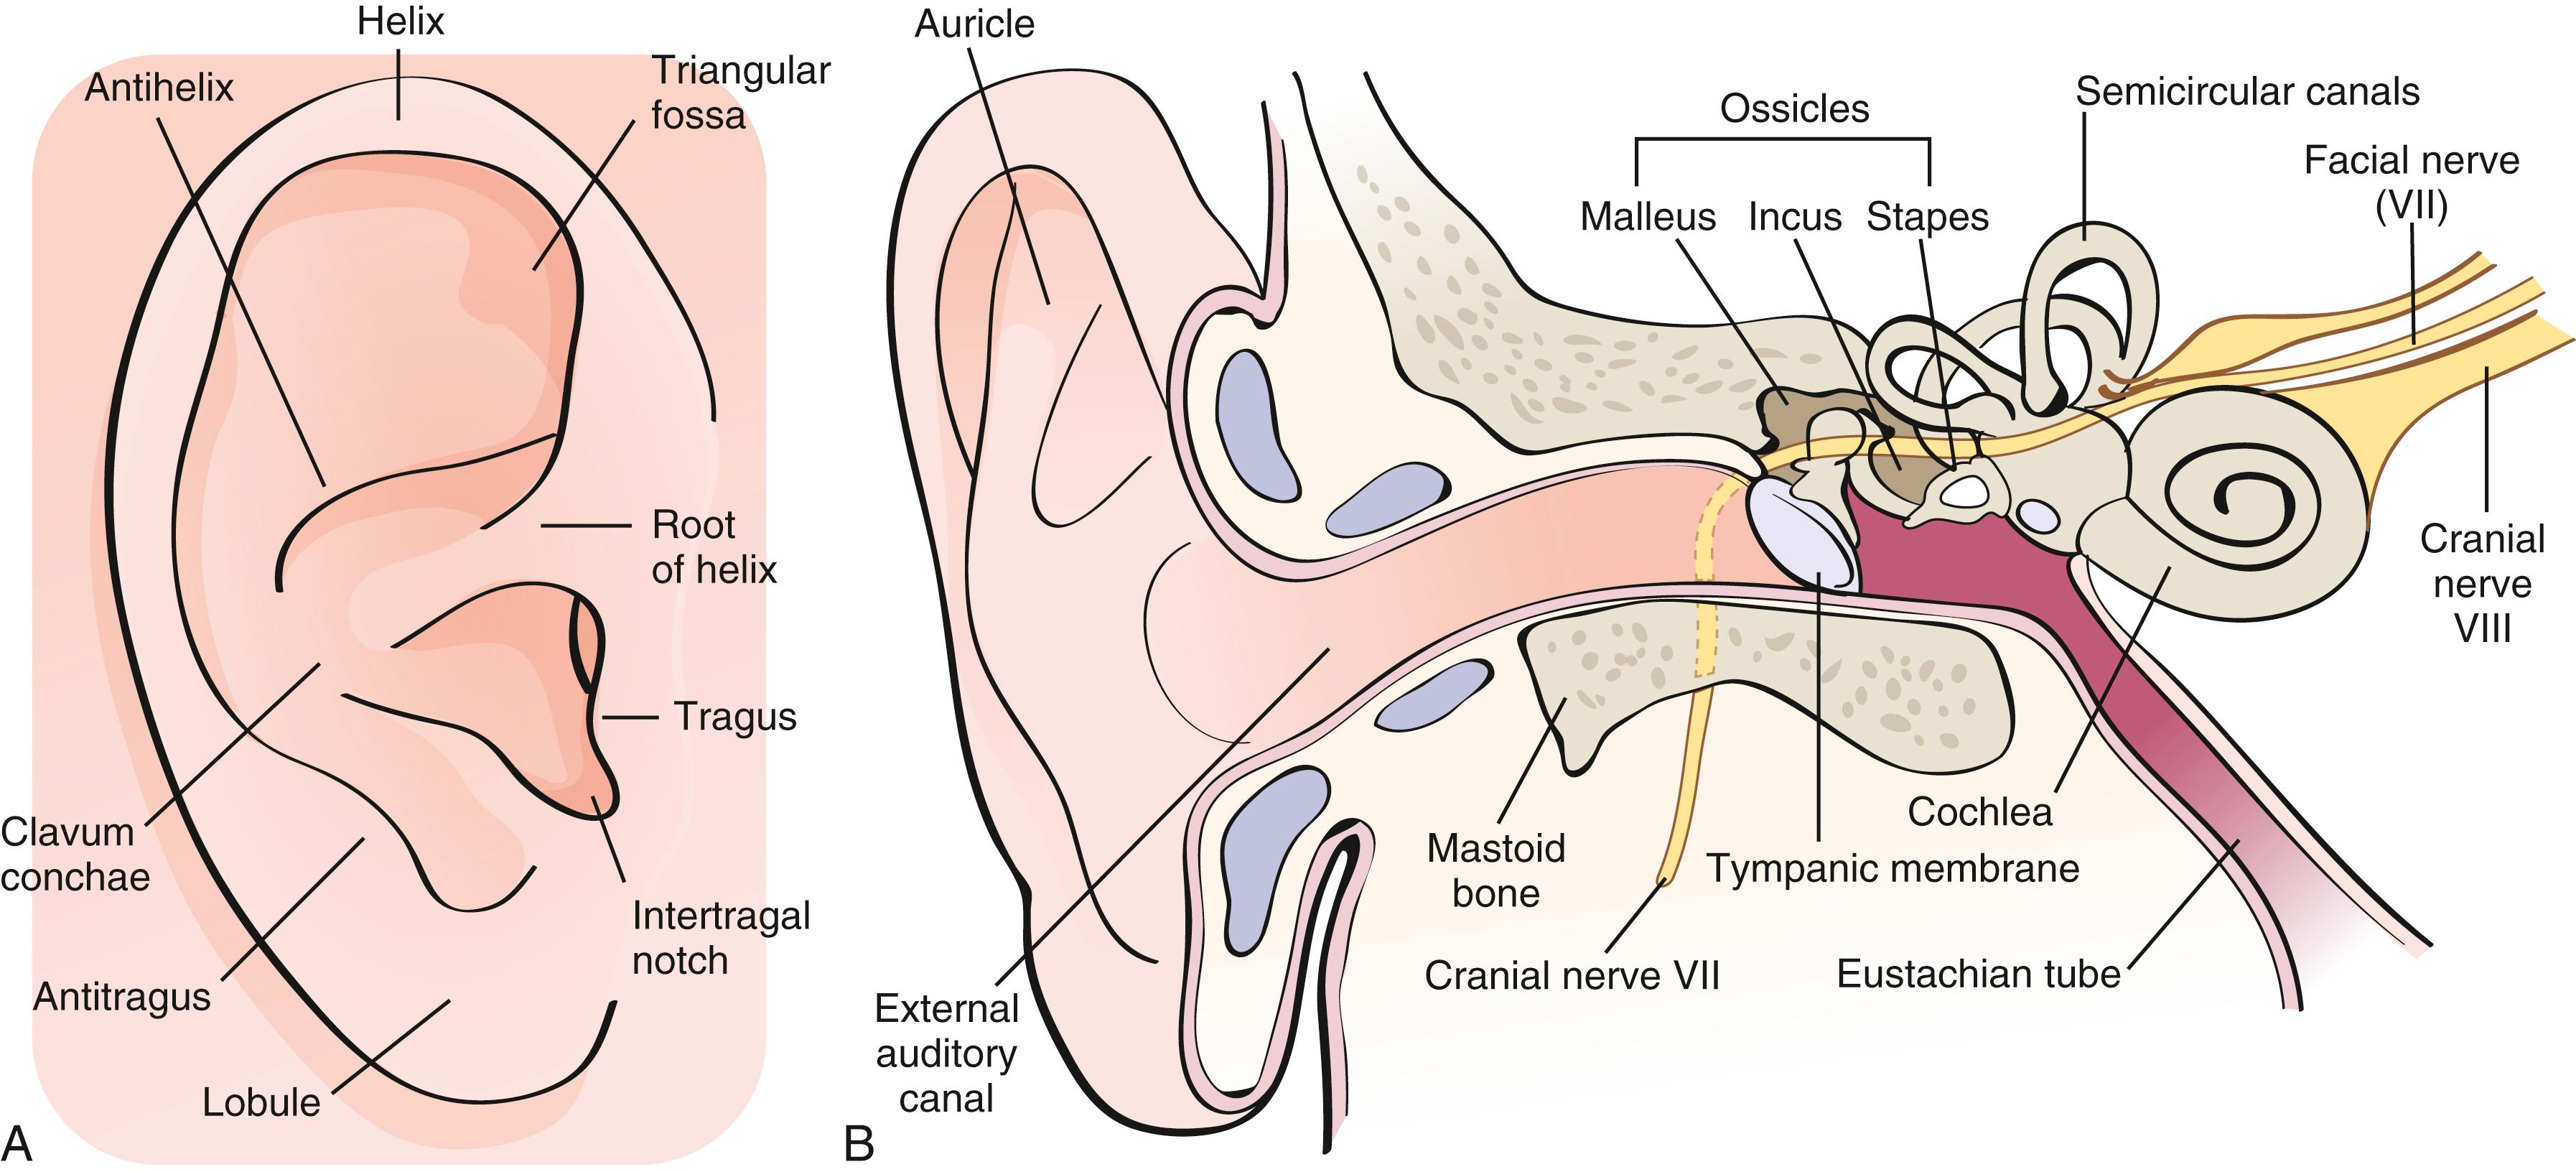 Fig. 5.1, Anatomy of the ear. A, A normal external ear (auricle or pinna) is shown, with its various landmarks labeled. It is helpful to refer to such a diagram in assessing congenital anomalies. B, This coronal section shows the various structures of the hearing and vestibular apparatus. The three main regions are the external ear, middle ear, and inner ear. The eustachian tube connects the middle ear and the nasopharynx and serves to drain and ventilate the middle ear.